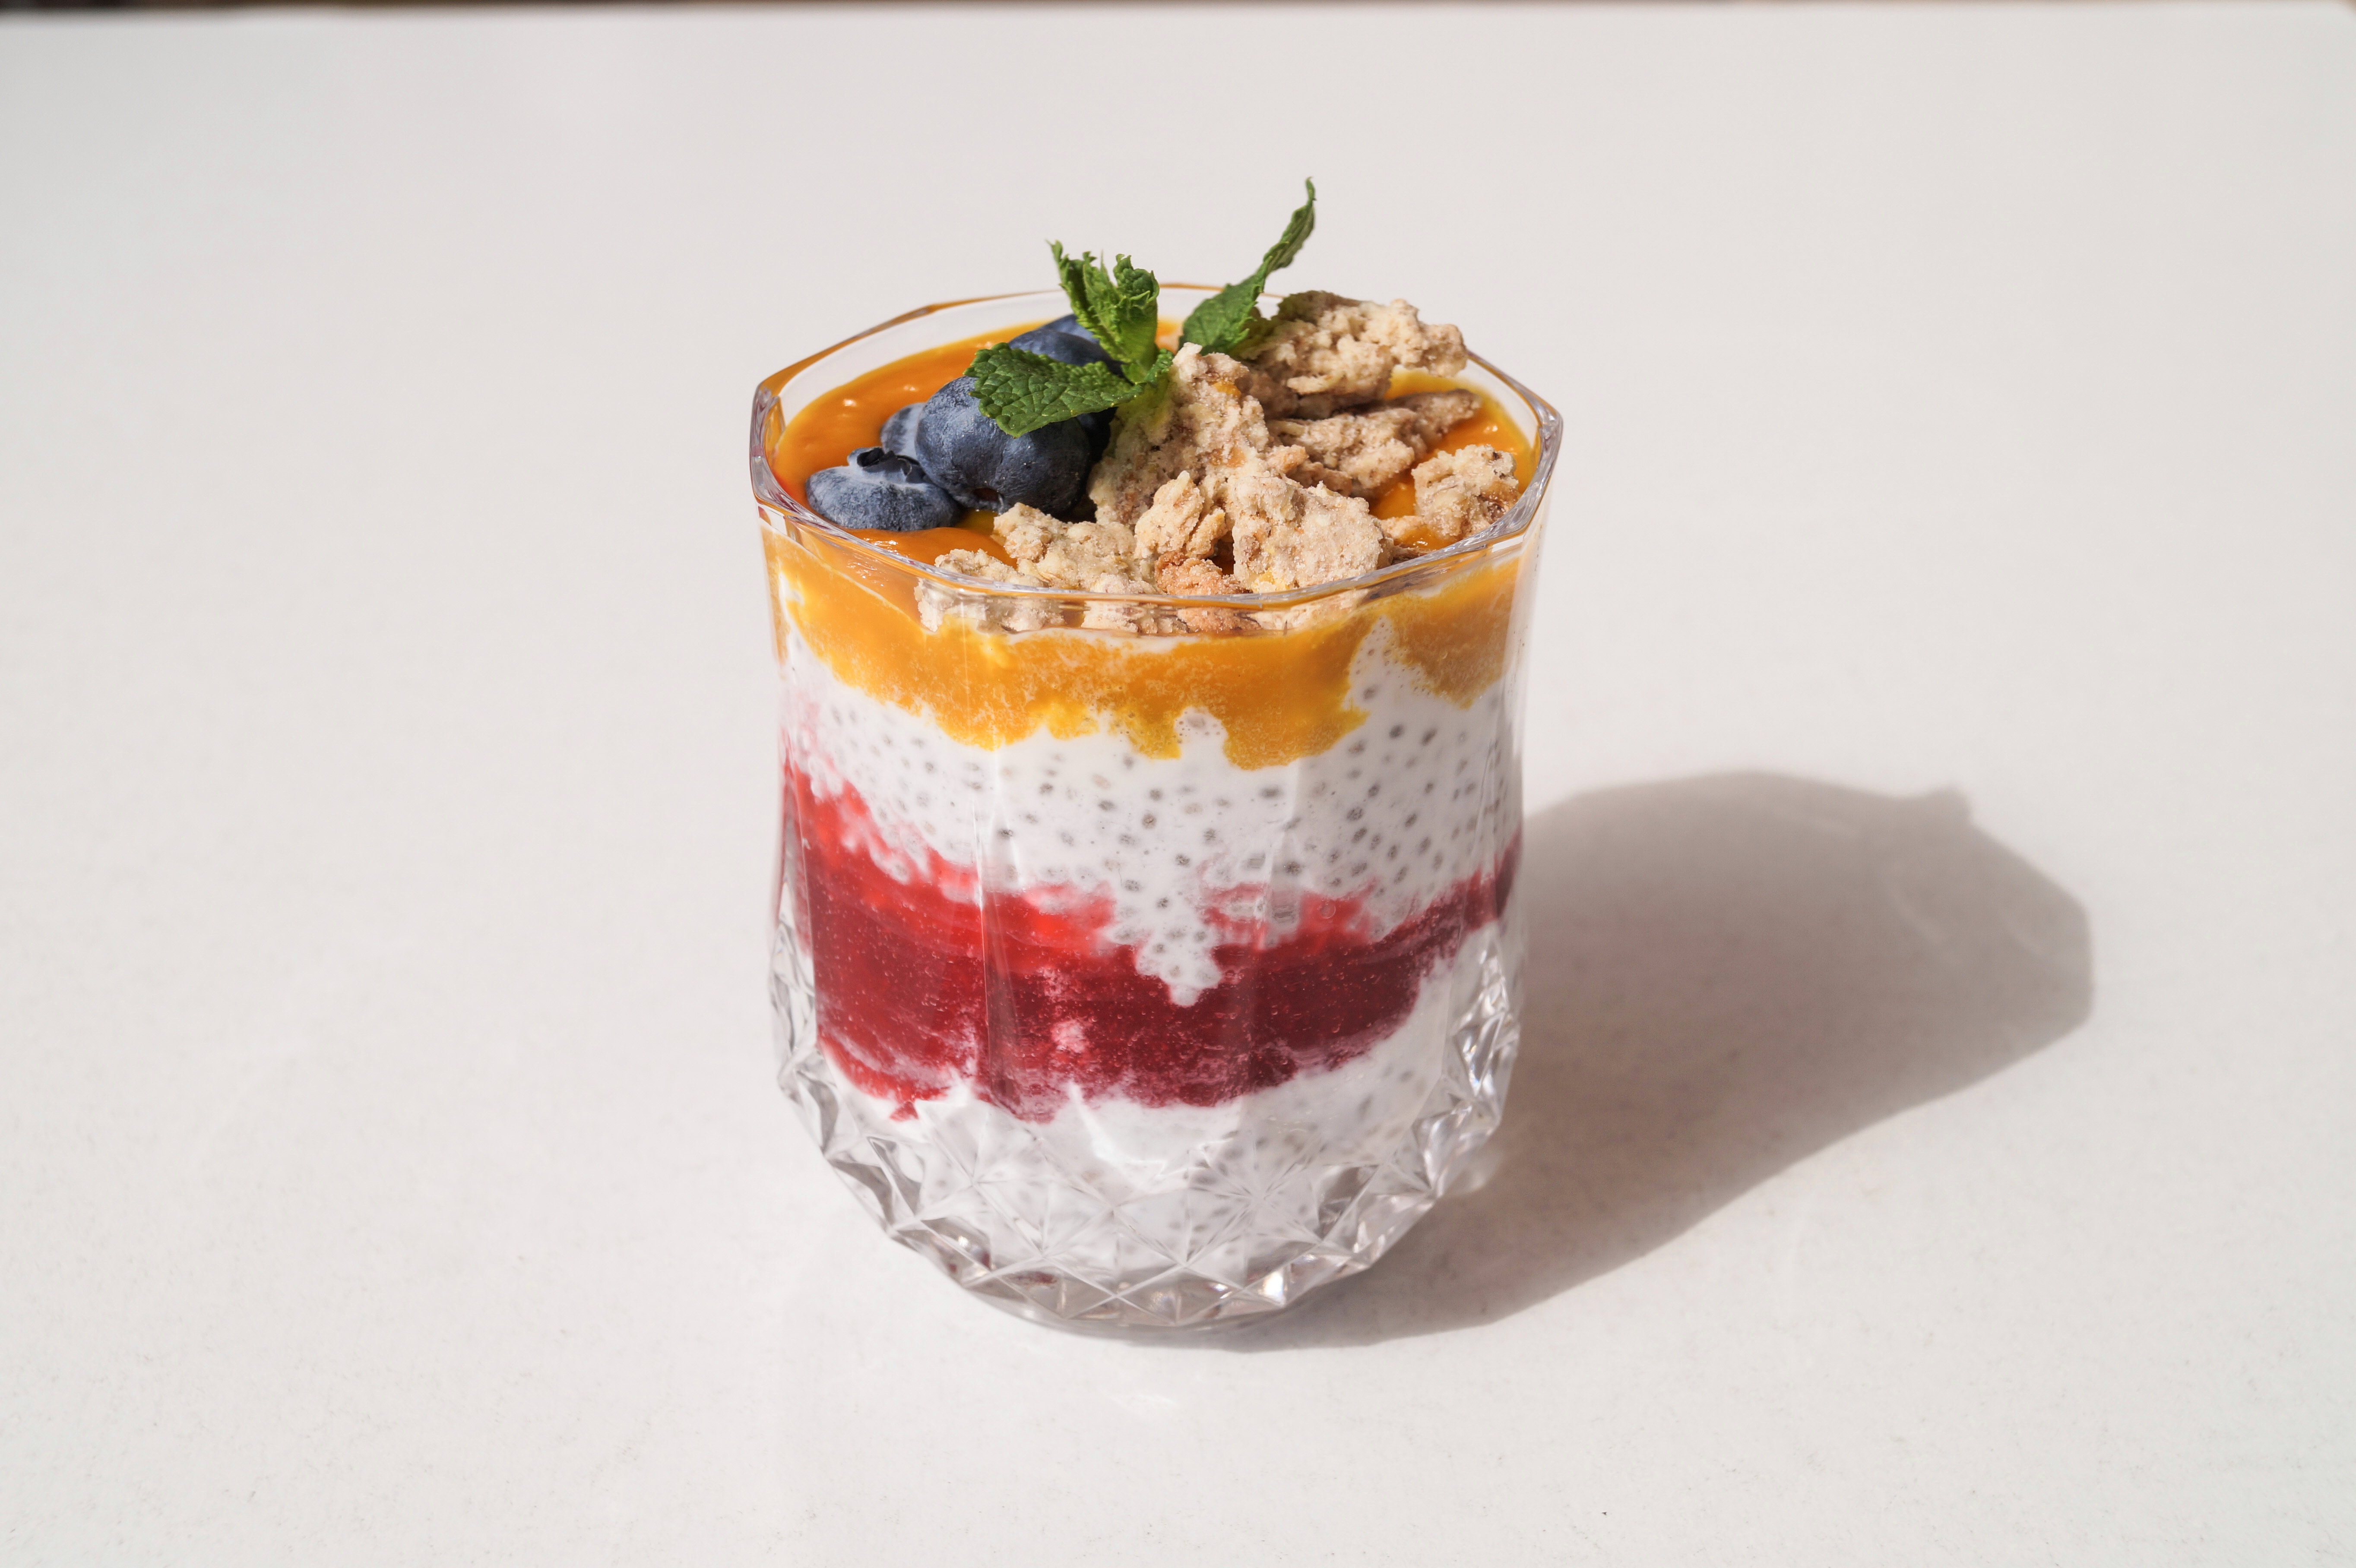 Chia pudding with coconut milk with mango puree, crunch crumble, strawberry-raspberry puree and blueberries